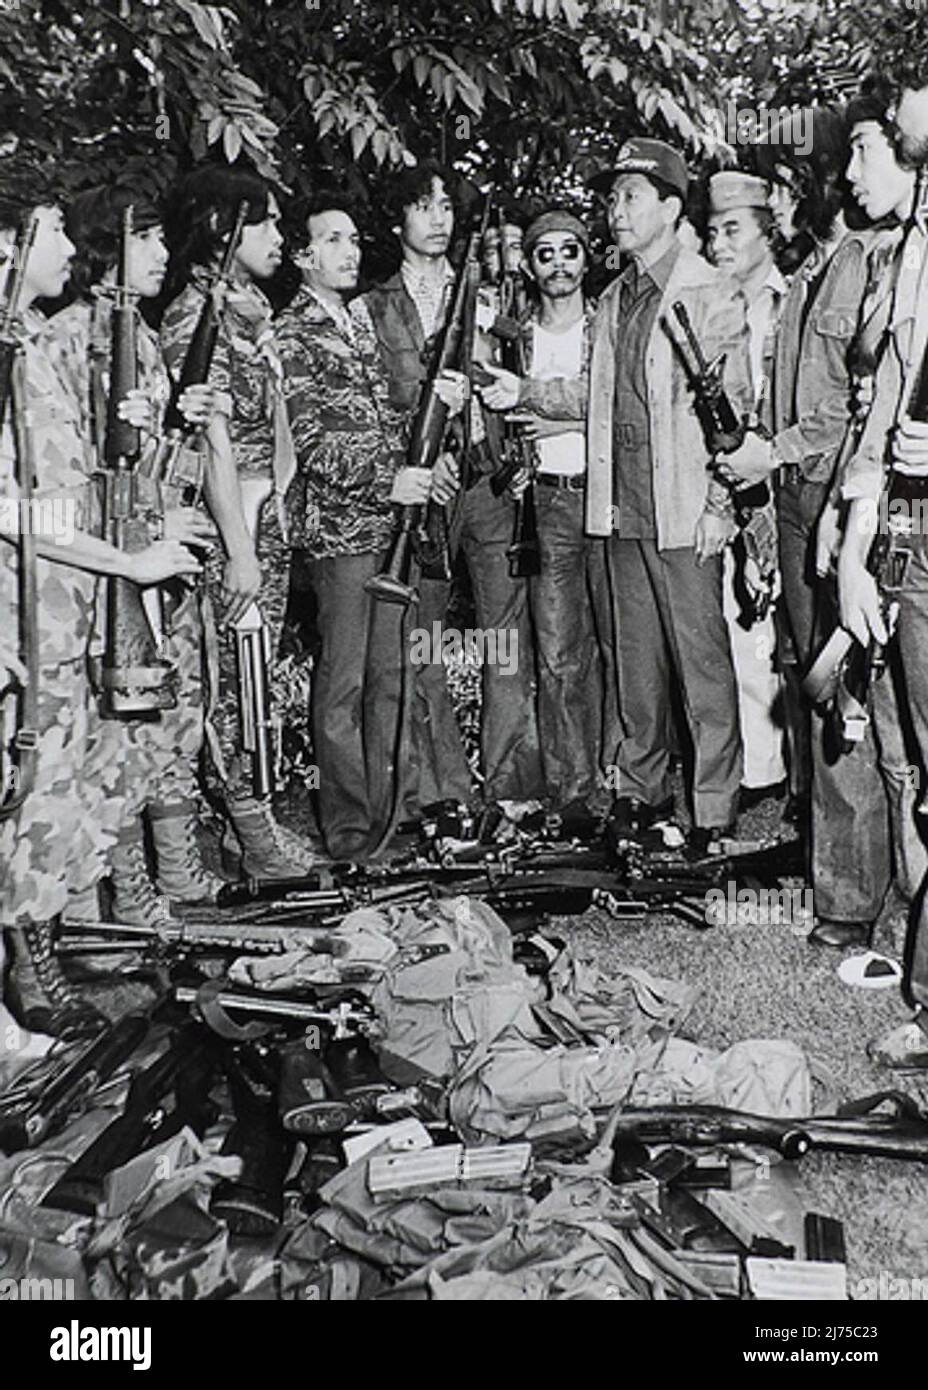 MNLF fighters surrender their firearms to President Ferdinand Marcos. Stock Photo